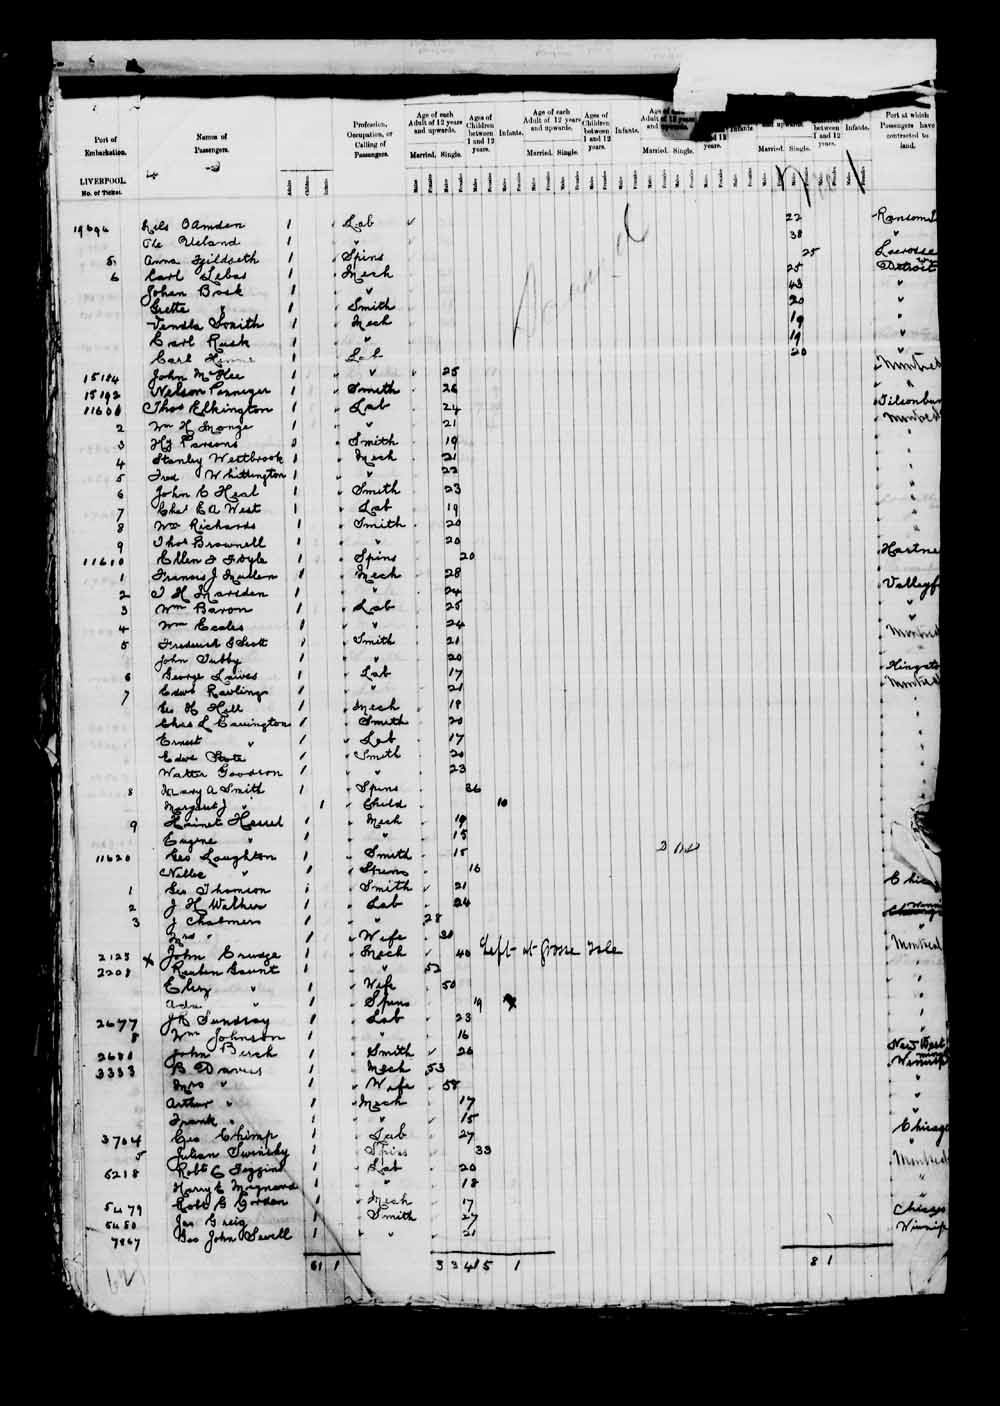 Digitized page of Quebec Passenger Lists for Image No.: e003551266